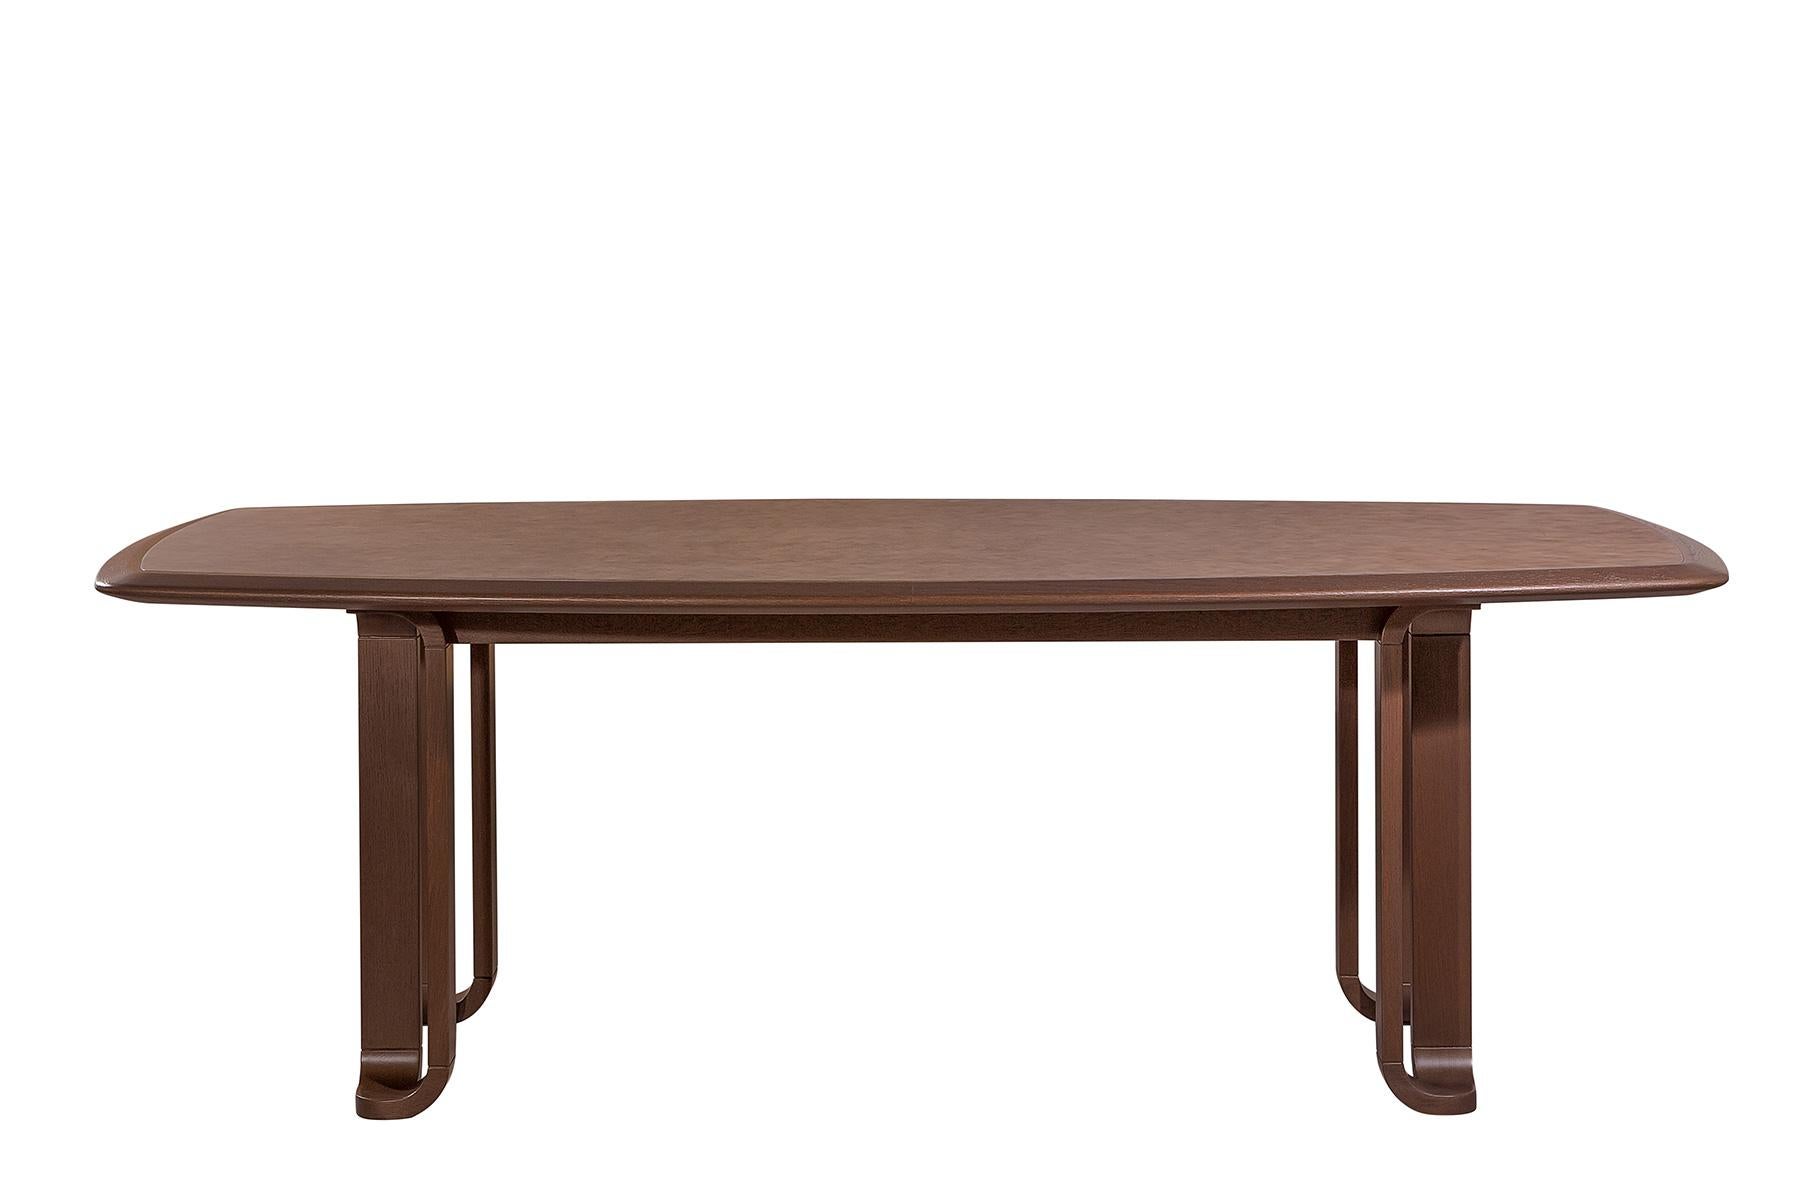 Yaprak dining table by Ekin Varon
Dimensions: W 210 x D 110 x 75 H
Materials: Walnut, maple, oak
Custom materials, sizing and finishes available as item is made to order.

Ekin Varon is the founder and creative director of Ekin Varon Design